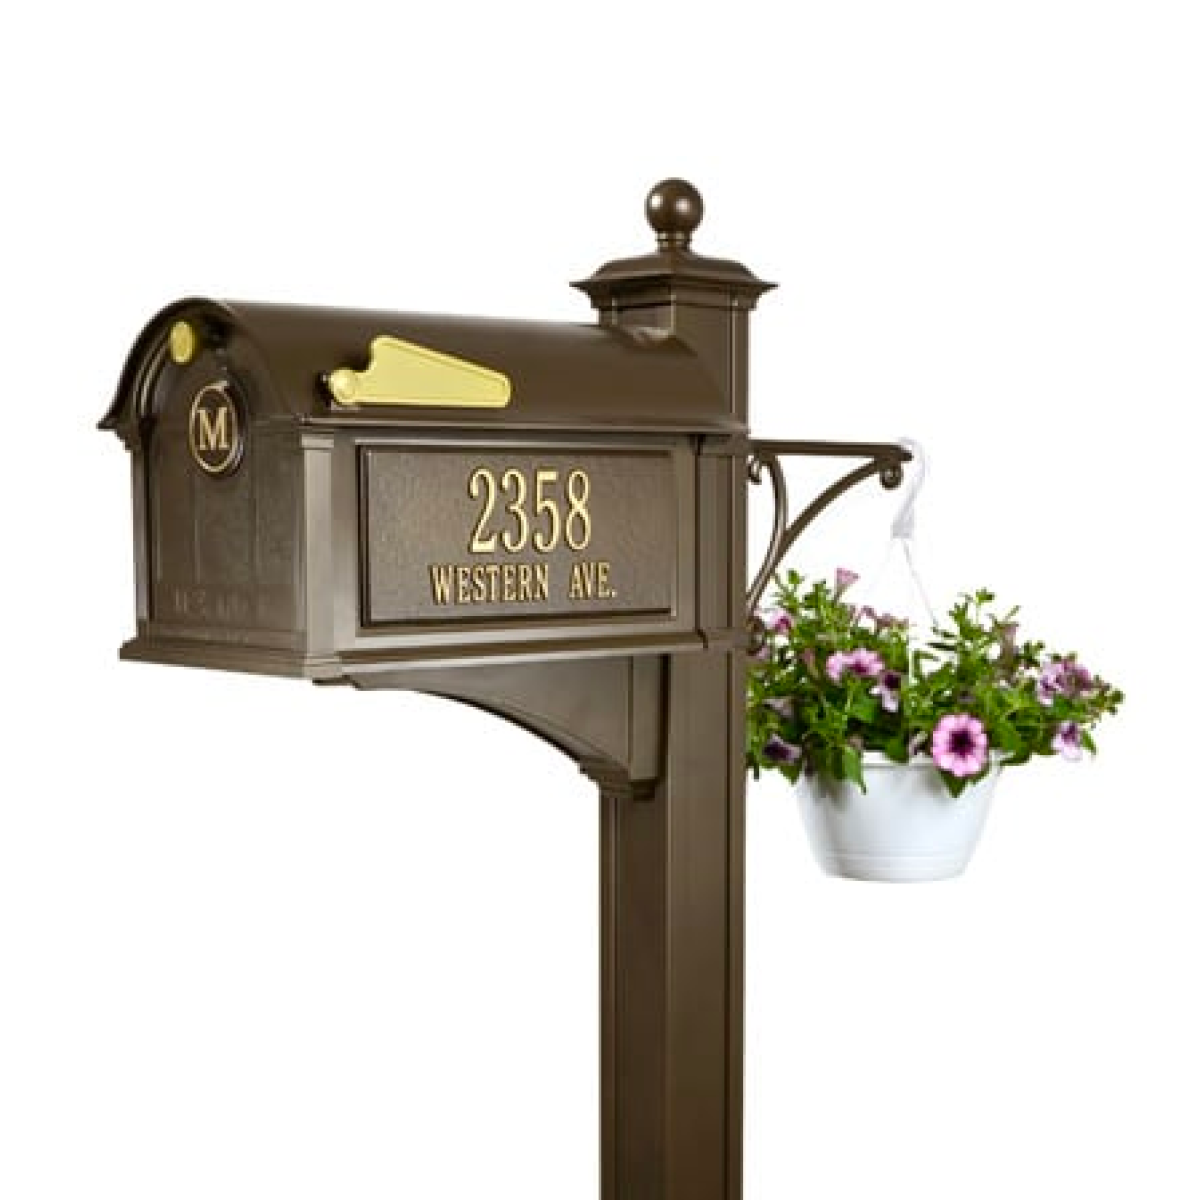 Whitehall Mailboxes- Balmoral Monogram Mailbox Deluxe Package